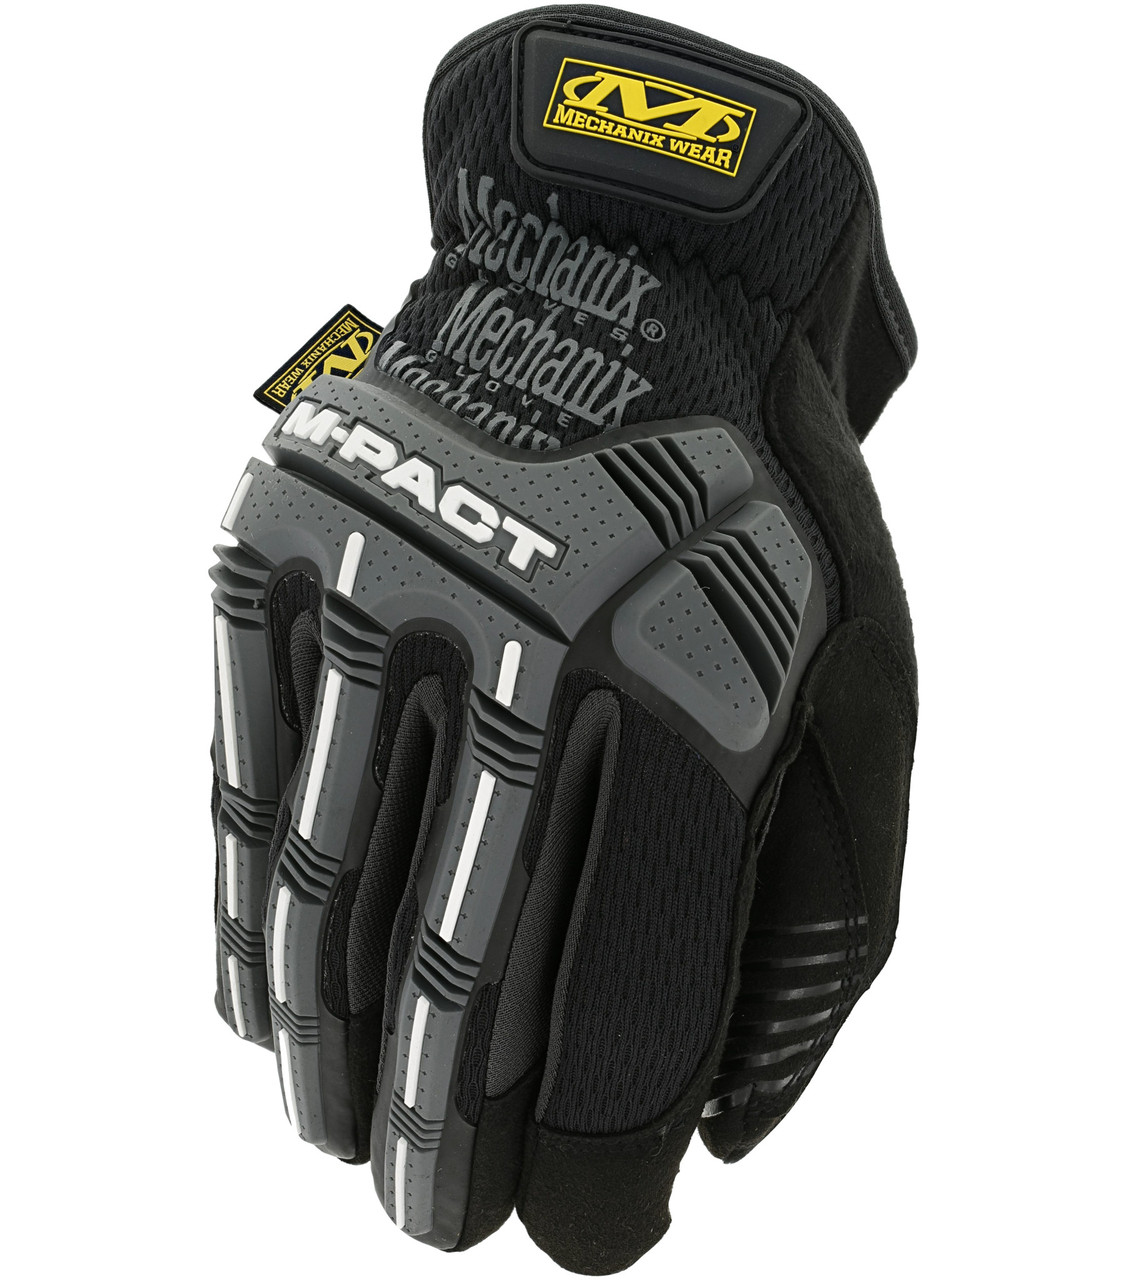 M-PACT OPEN CUFF BLACK, IMPACT RESISTANT WORK GLOVES, BLACK/GREY  MPC-58-010